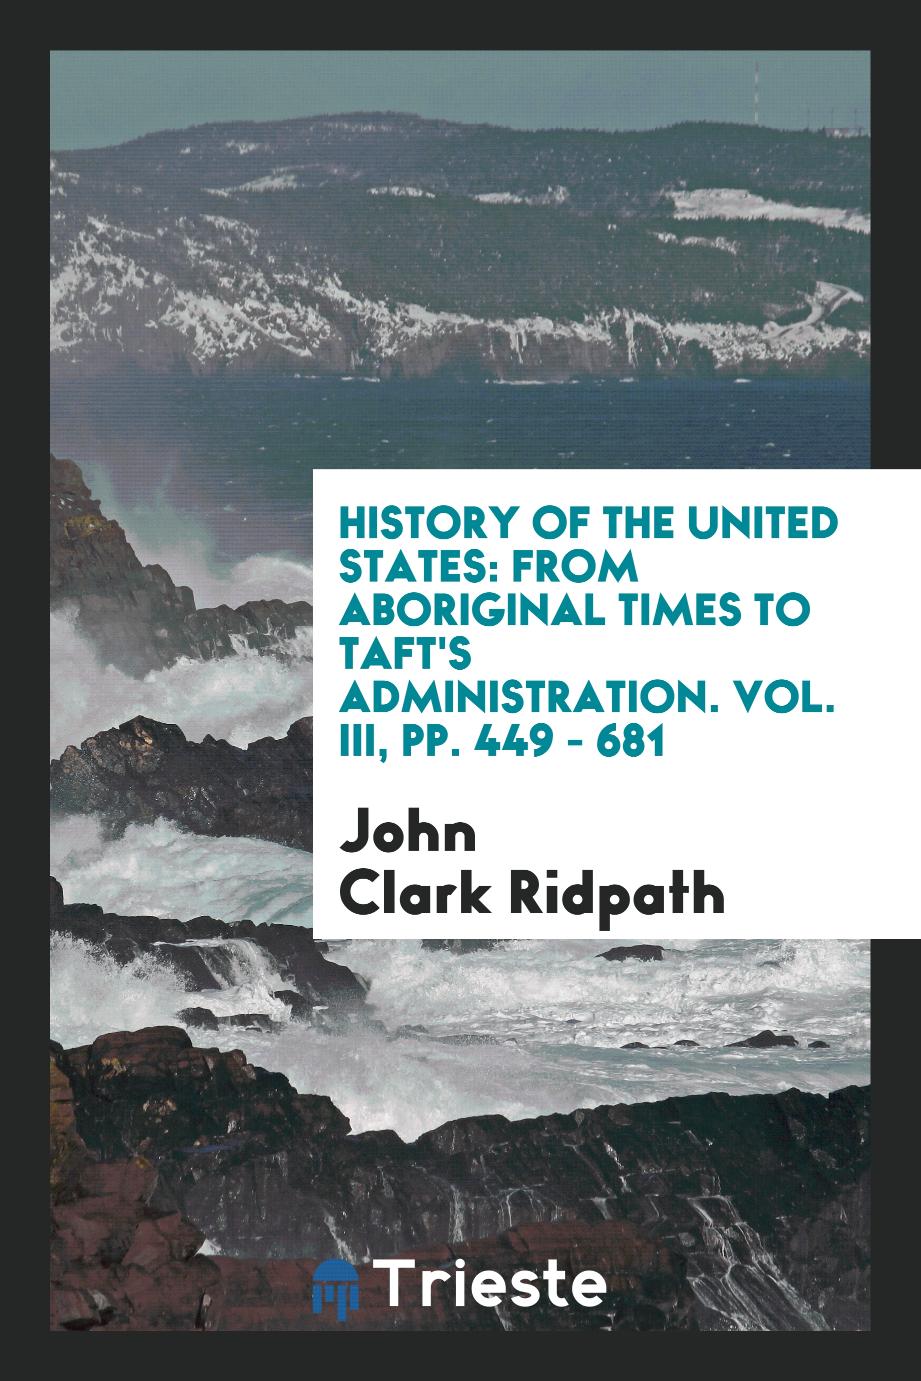 History of the United States: from aboriginal times to Taft's administration. Vol. III, pp. 449 - 681